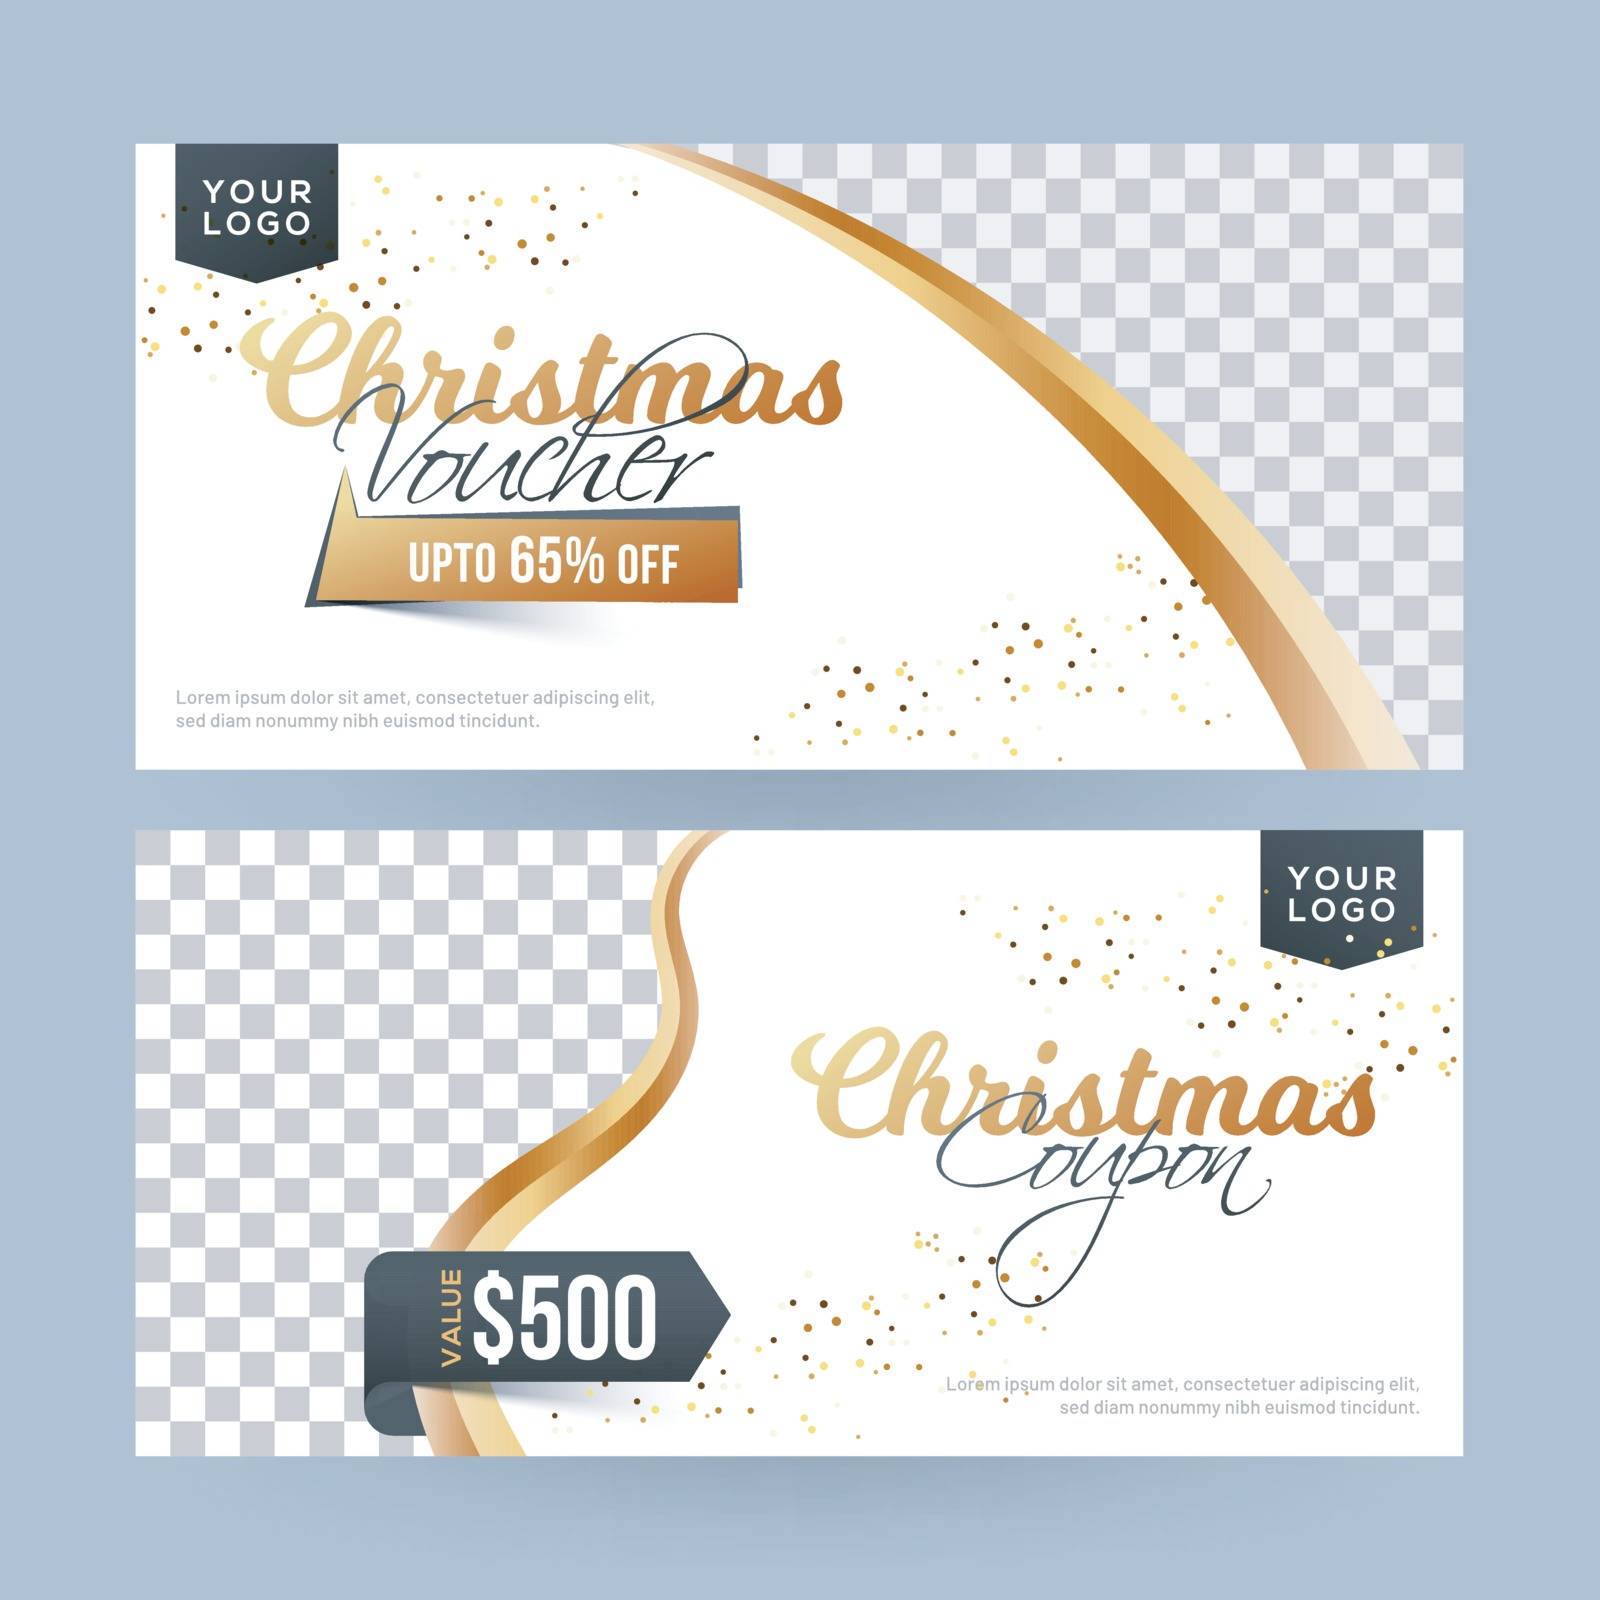 Christmas voucher or coupon layout with different discount value by aispl